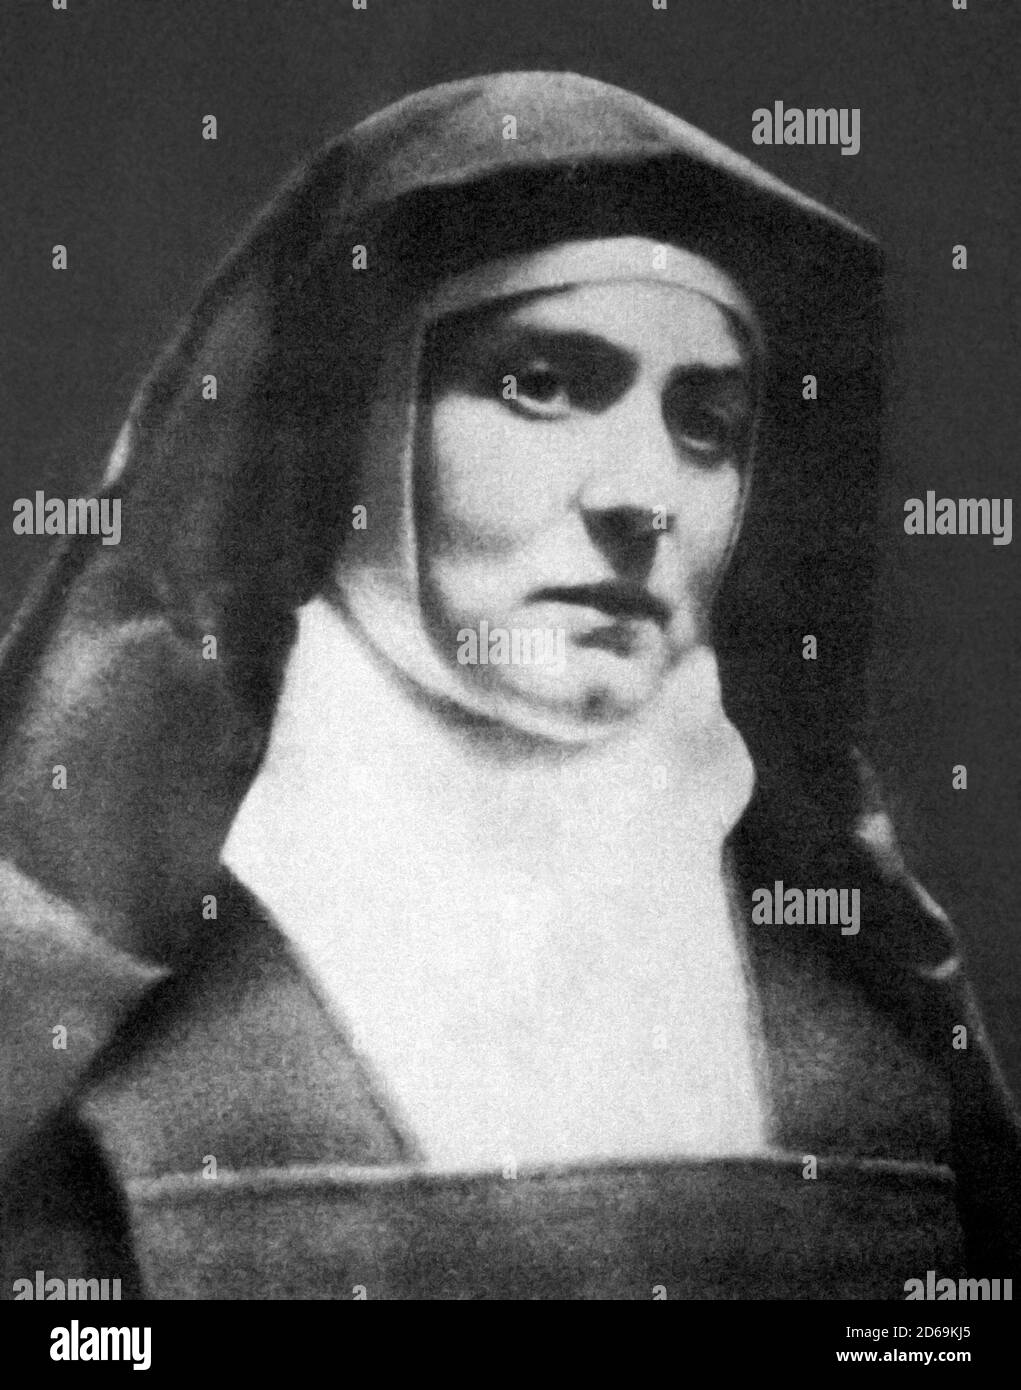 Edith Stein. Portrait of the German Jewish philosopher, Edith Stein (1891-1942), who converted to Catholicism, photo c.1938. Her religious name was Teresia Benedicta a Cruce, also known as St. Edith Stein or St Teresia Benedicta of the Cross. Stock Photo